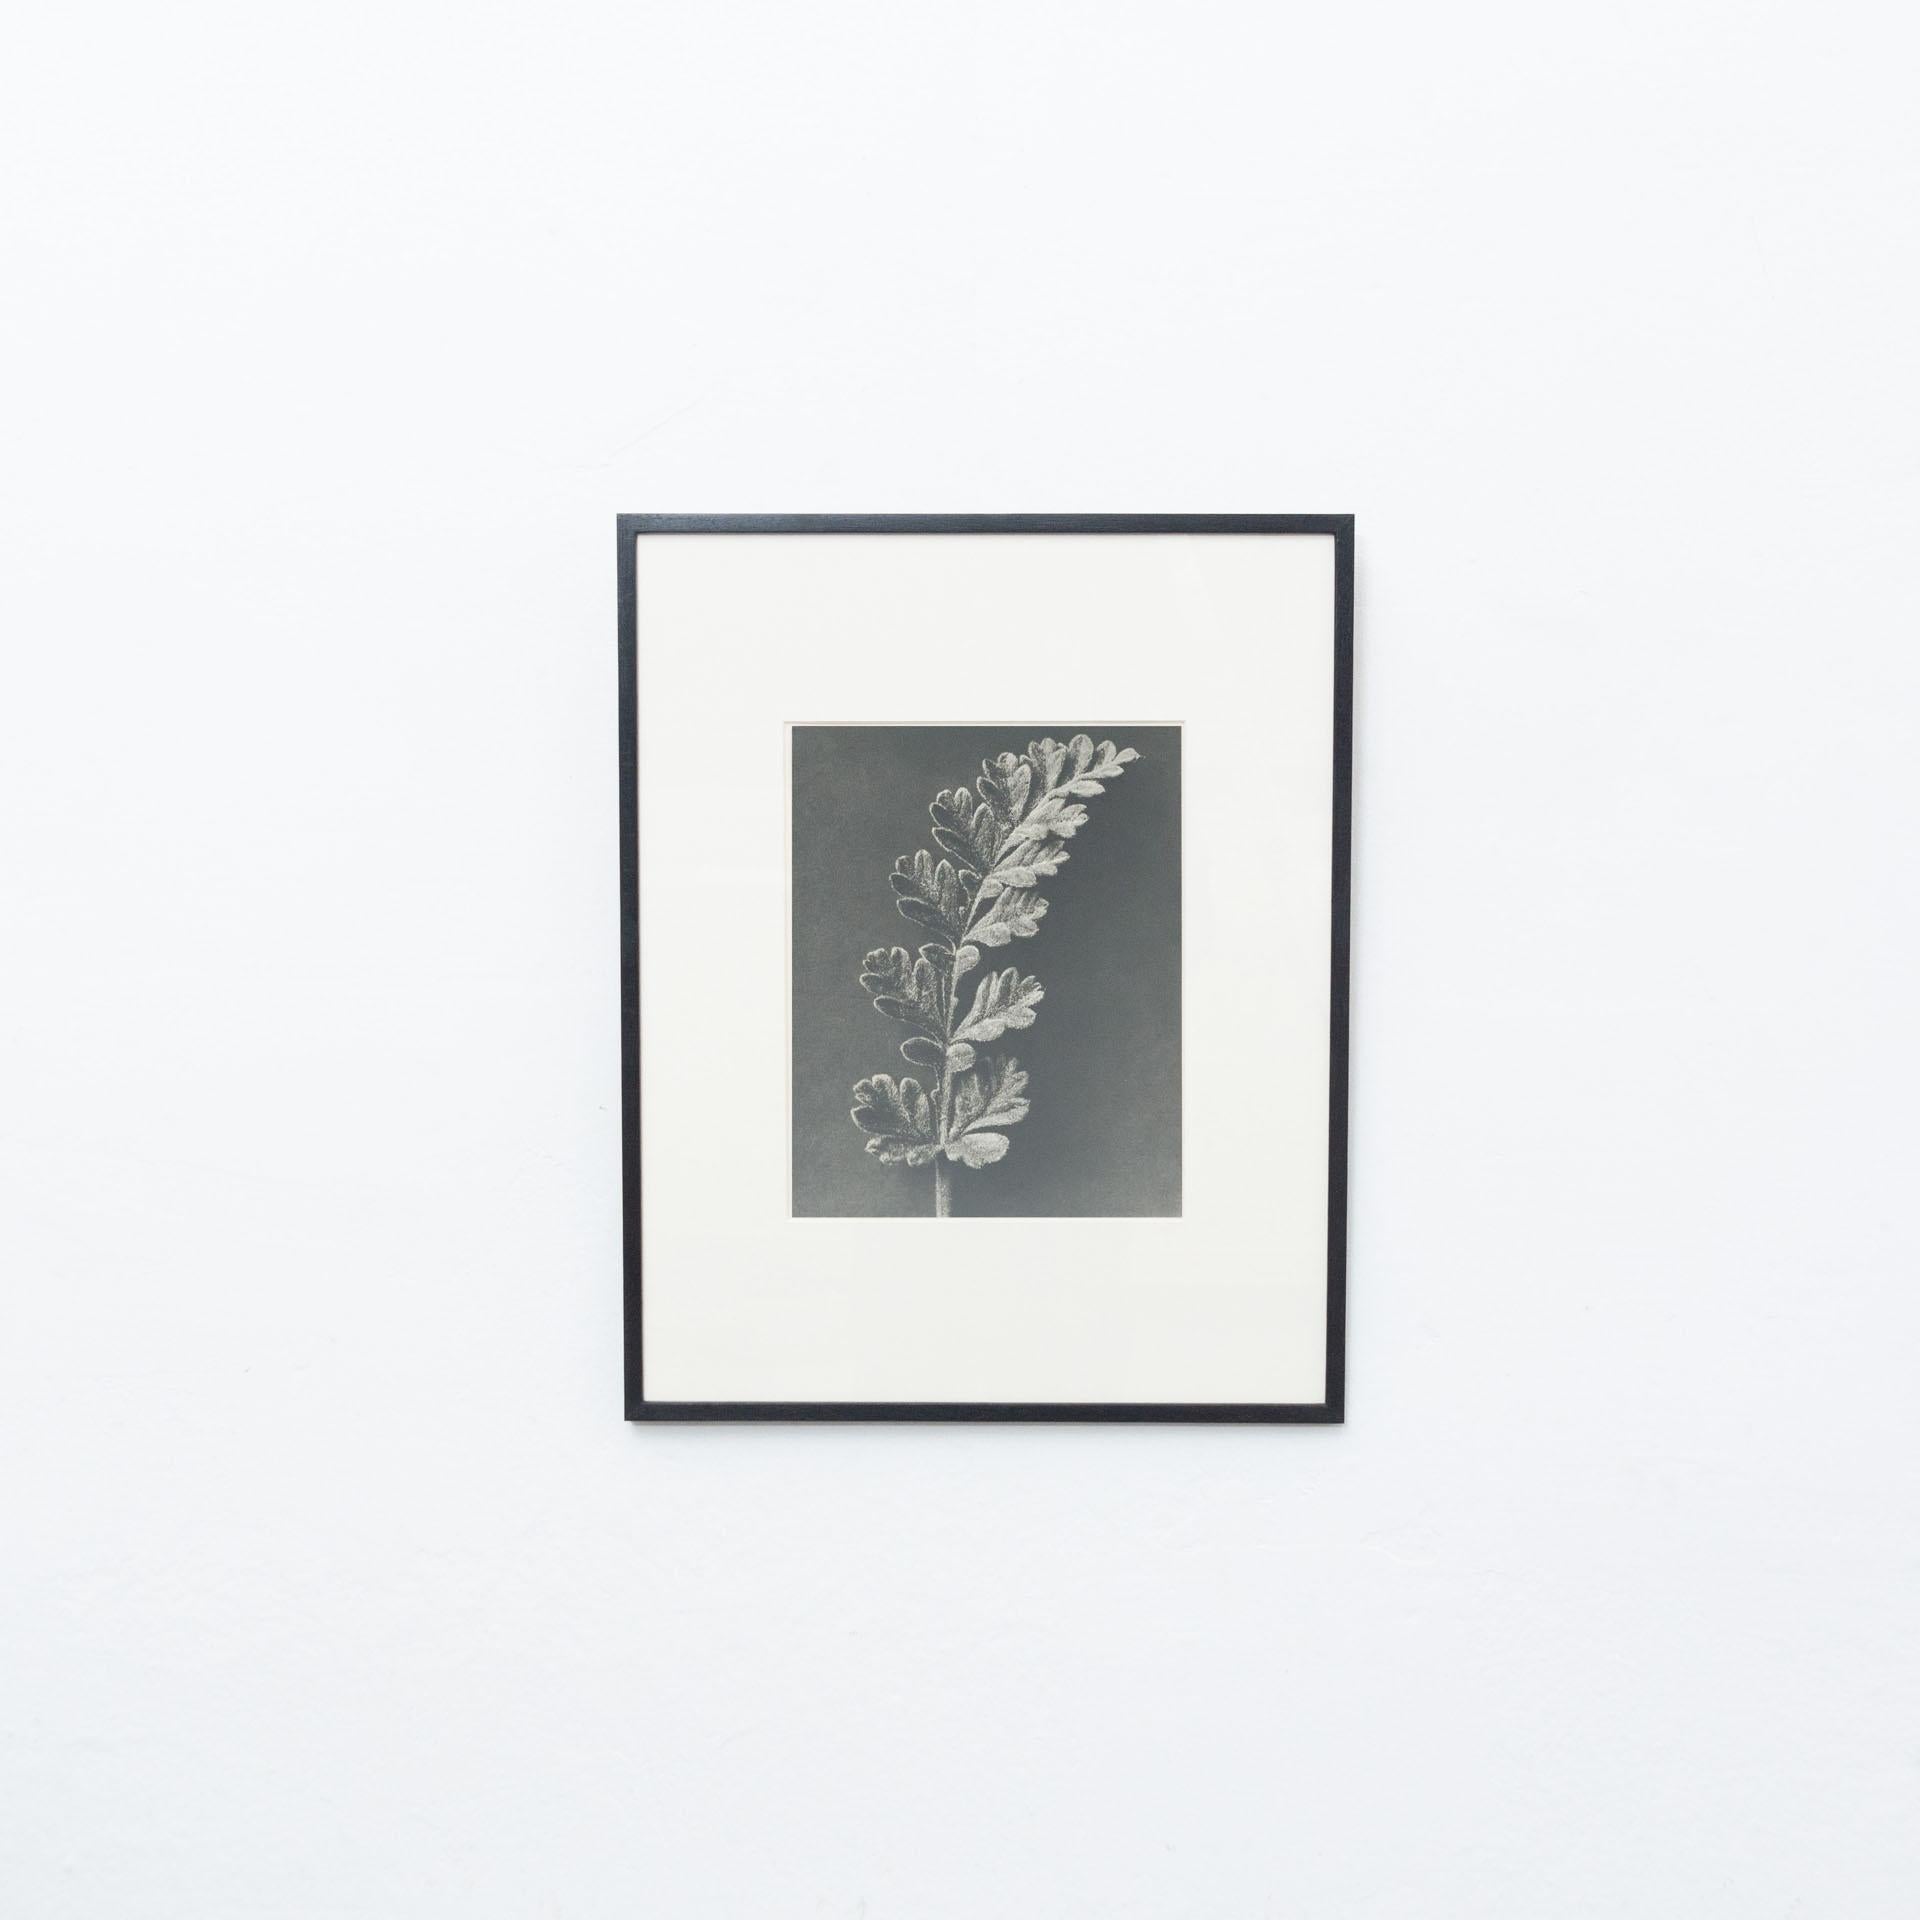 Karl Blossfeldt Photogravure from the edition of the book 'Wunder in der Natur' in 1942.

In original condition, with minor wear consistent with age and use, preserving a beautiful patina.

Karl Blossfeldt (June 13, 1865 – December 9, 1932) was